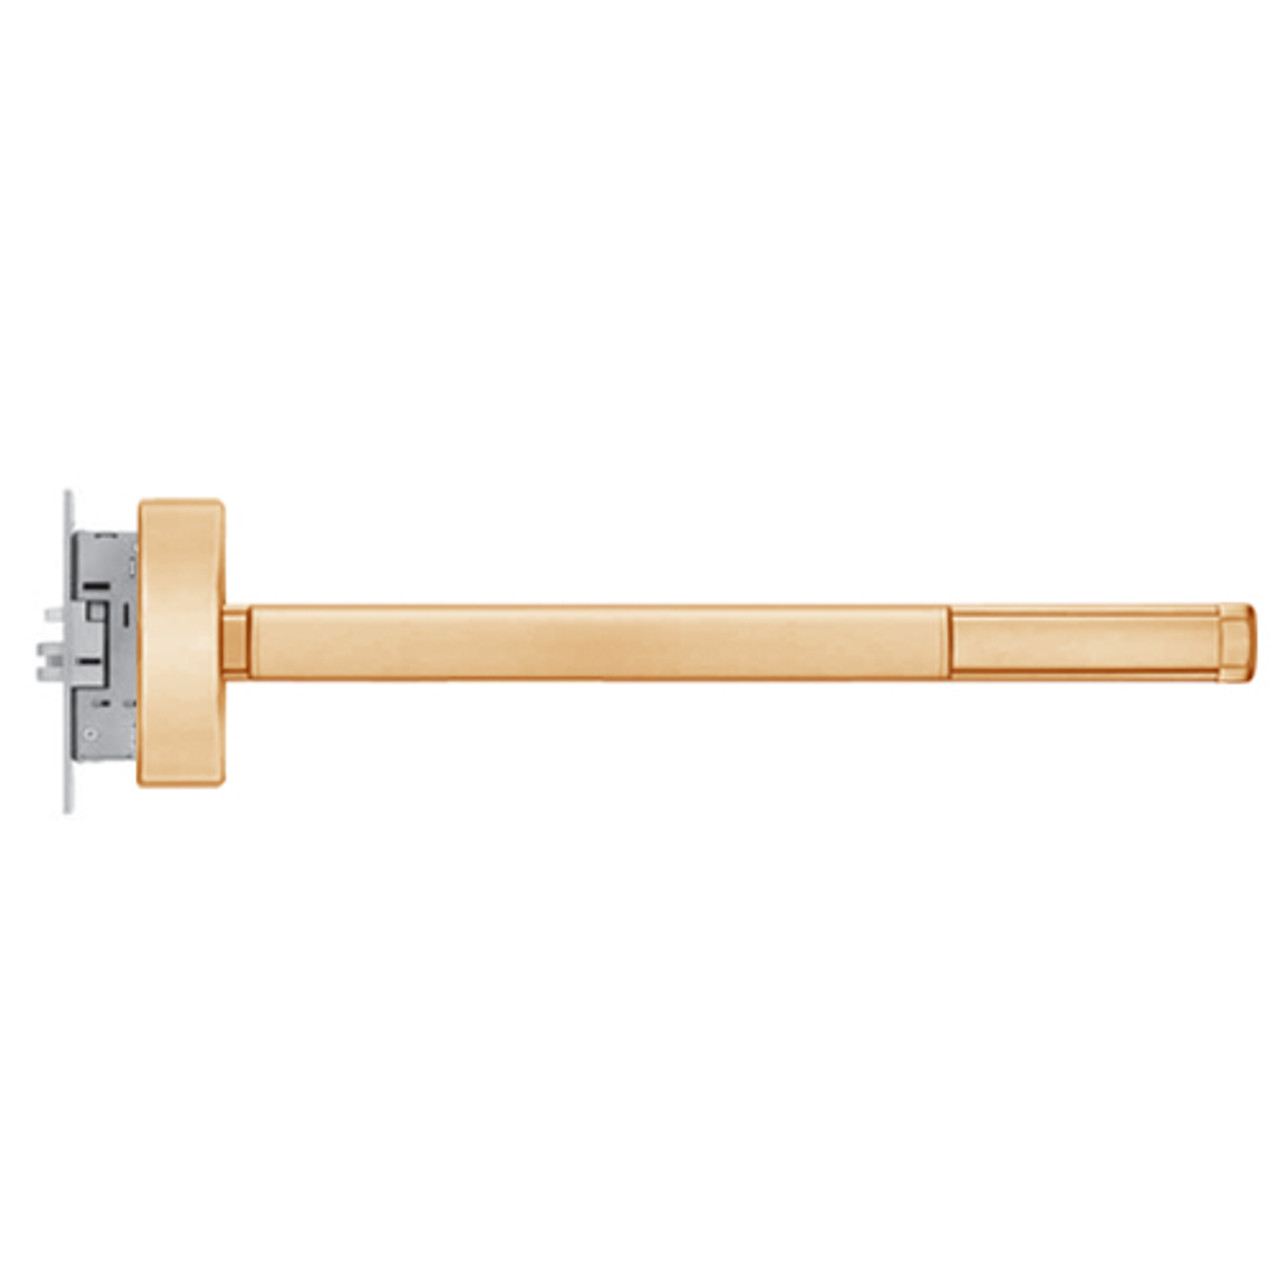 MLR2303-LHR-612-48 PHI 2300 Series Apex Mortise Exit Device with Motorized Latch Retraction Prepped for Key Retracts Latchbolt in Satin Bronze Finish